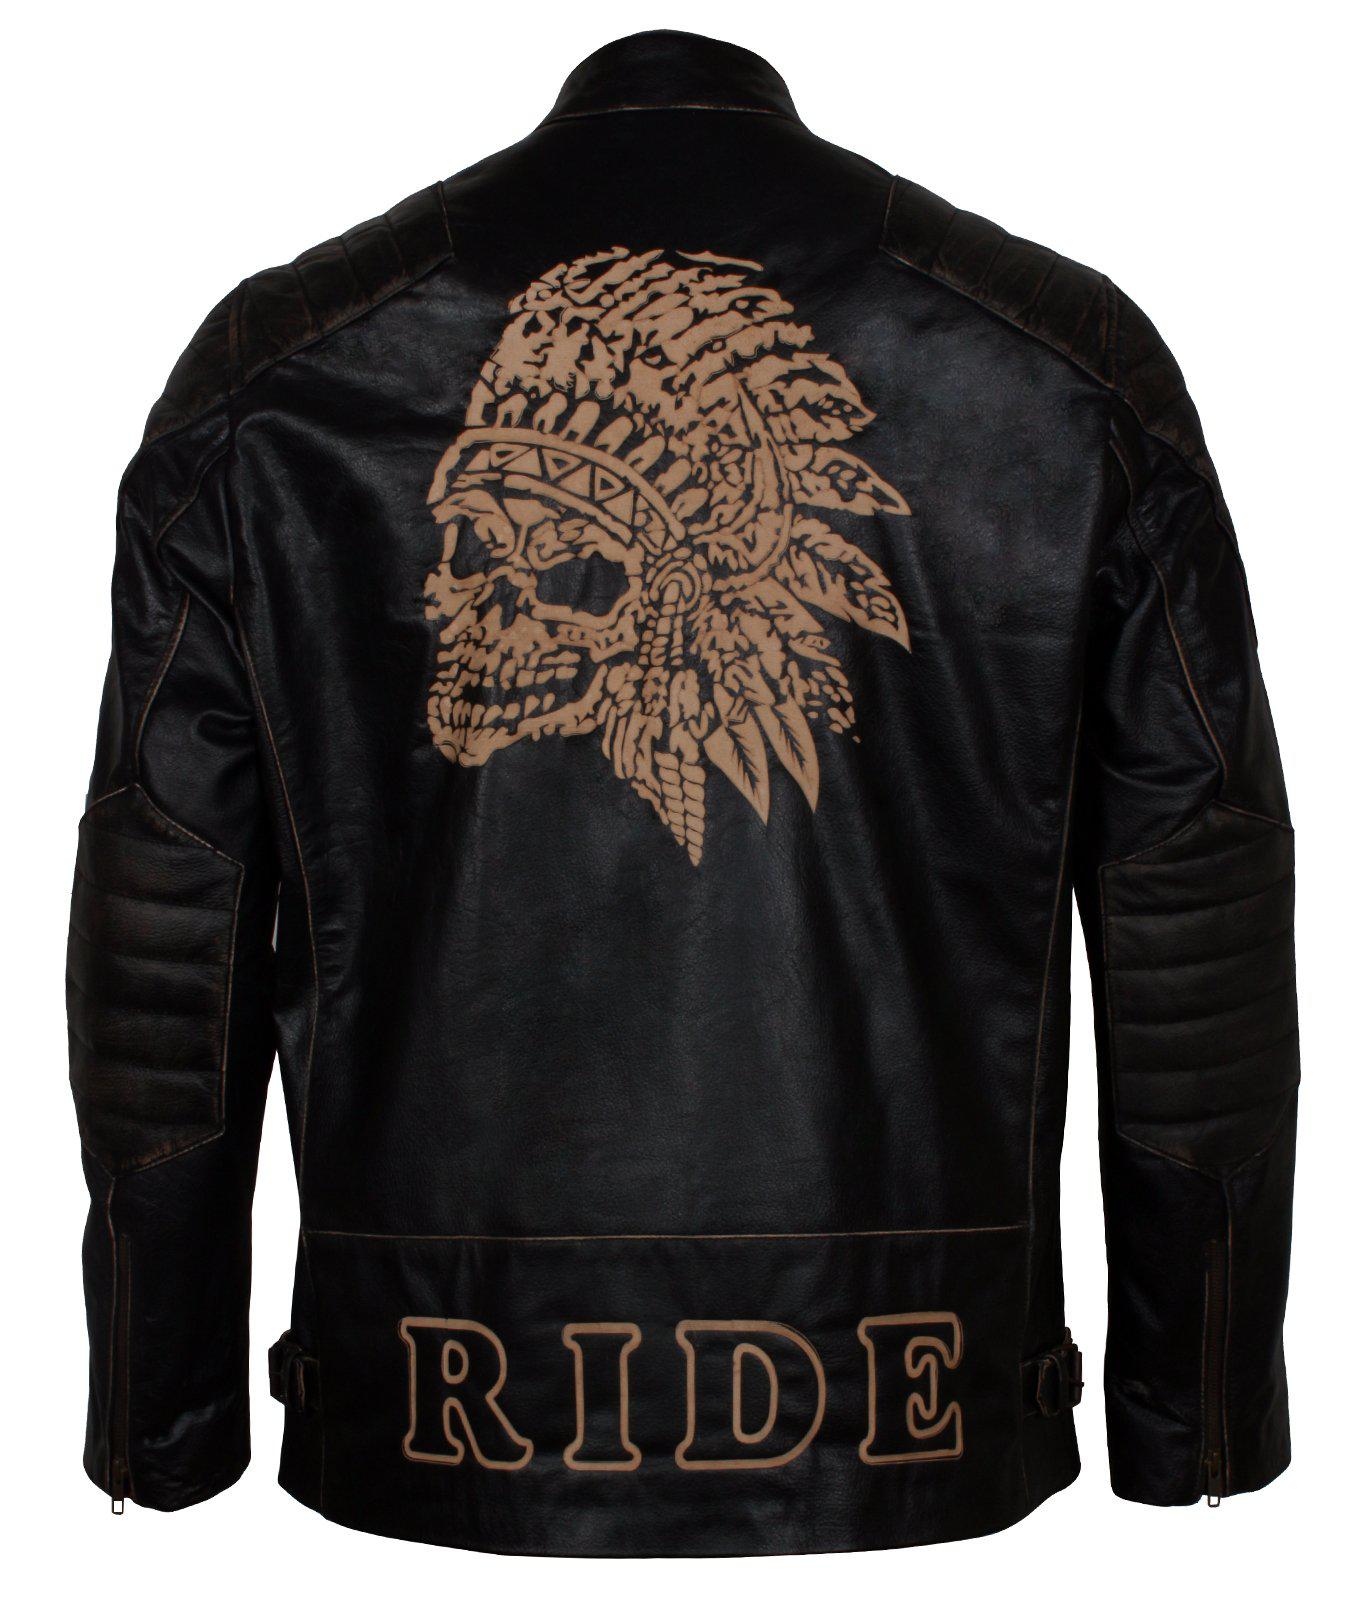 Skull Leather Jacket Engraved for Bikers in leather